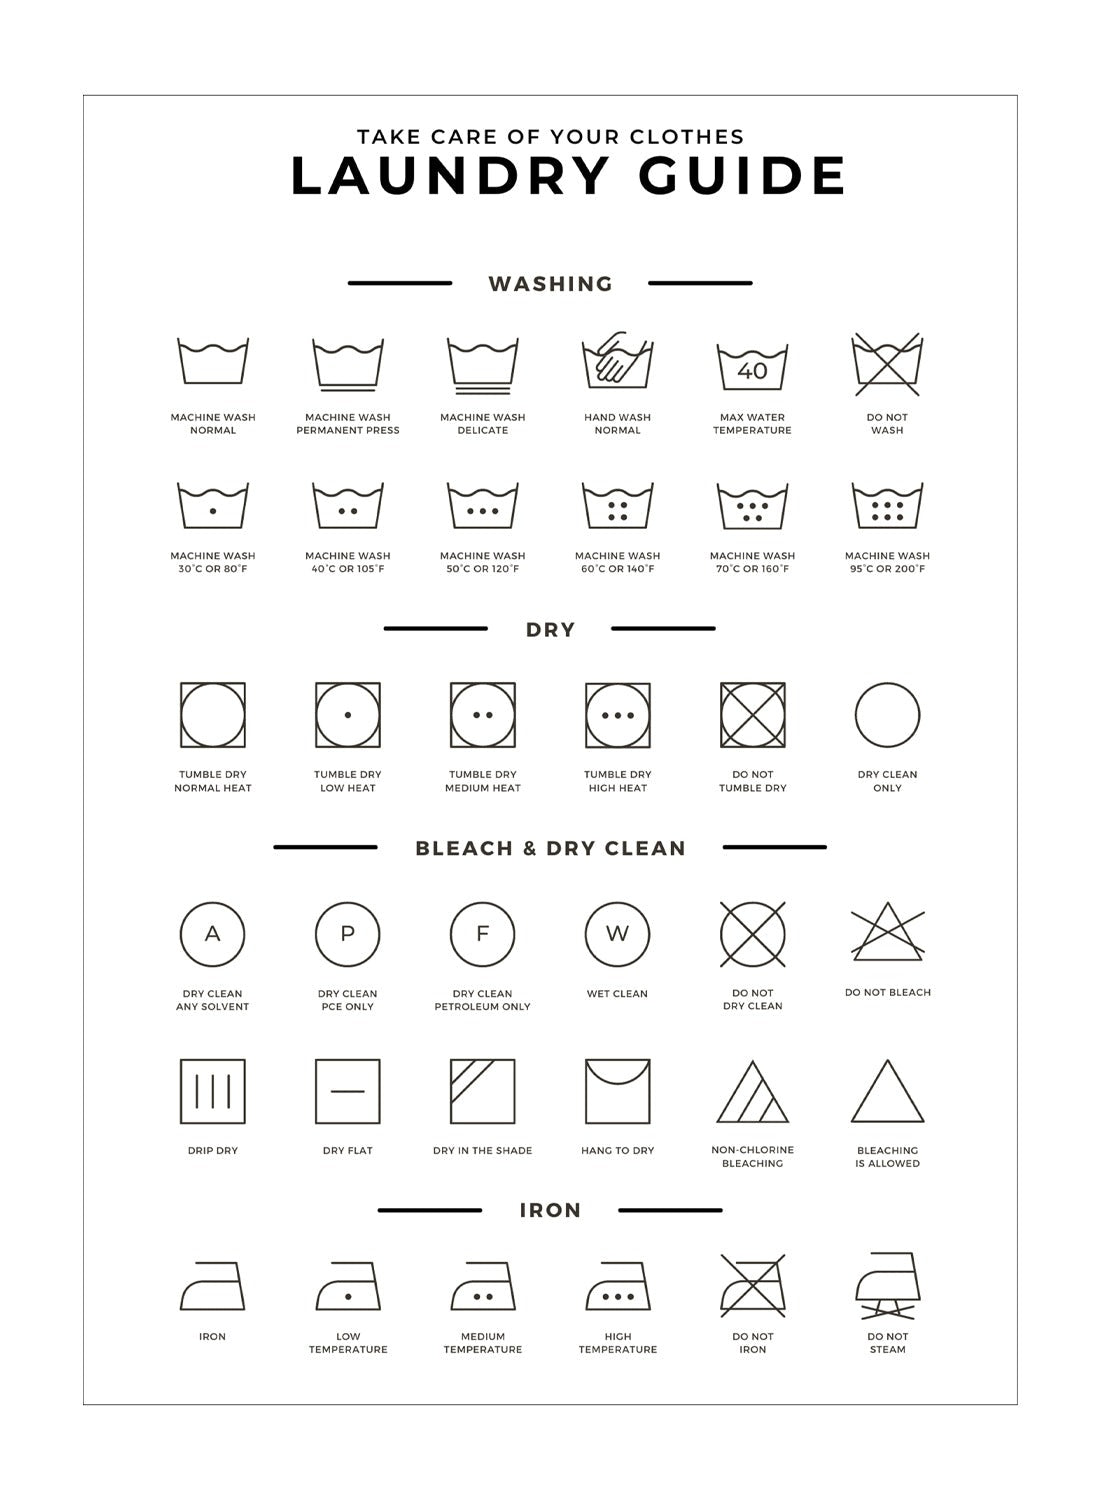 LAUNDRY GUIDE